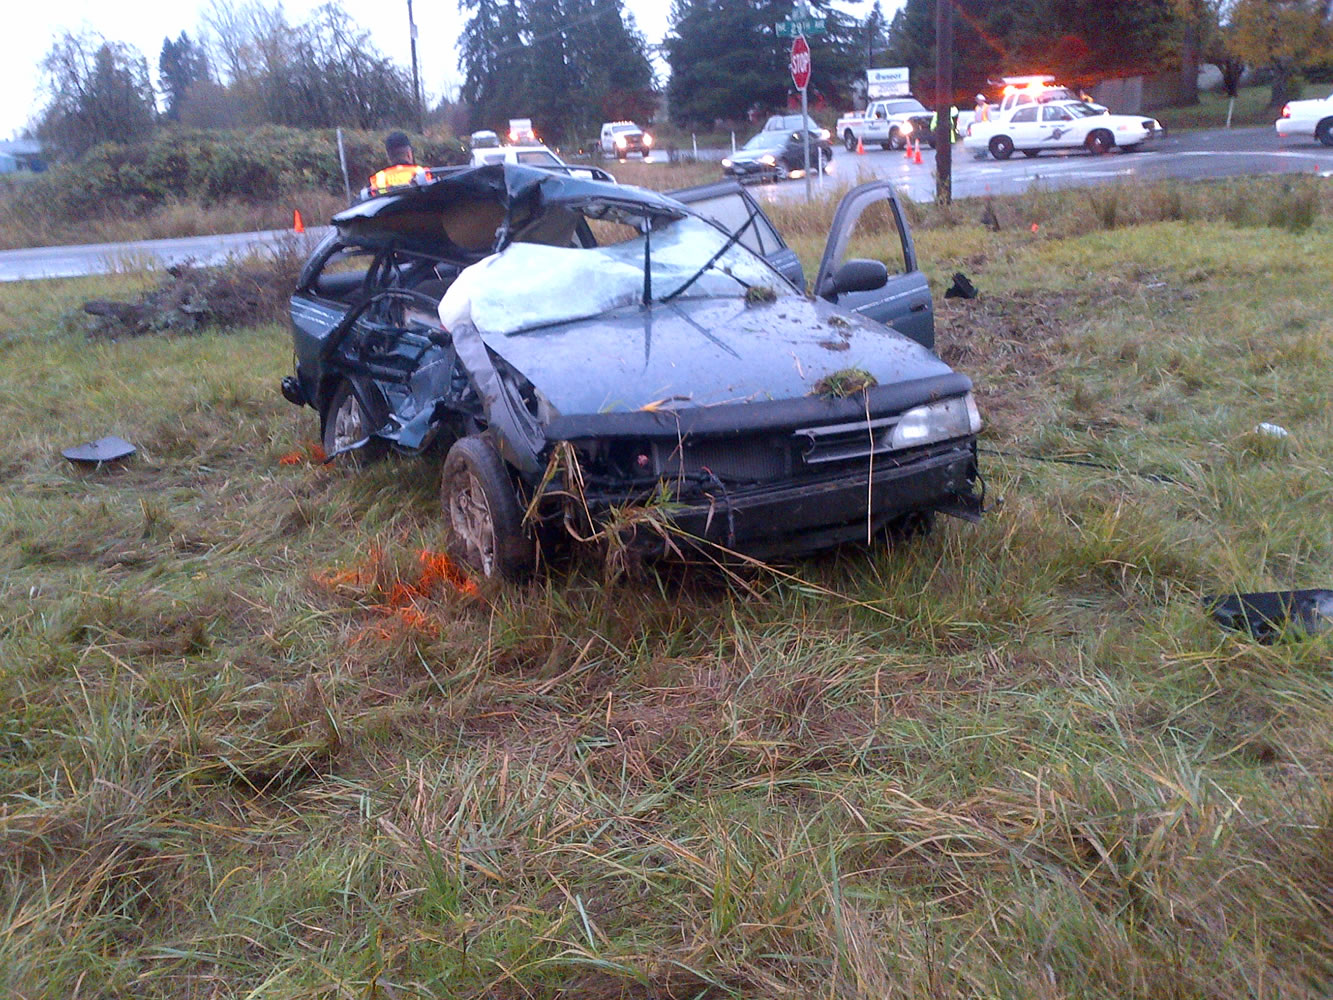 A Woodland teen died after a two-car collision on Highway 502 Friday afternoon.